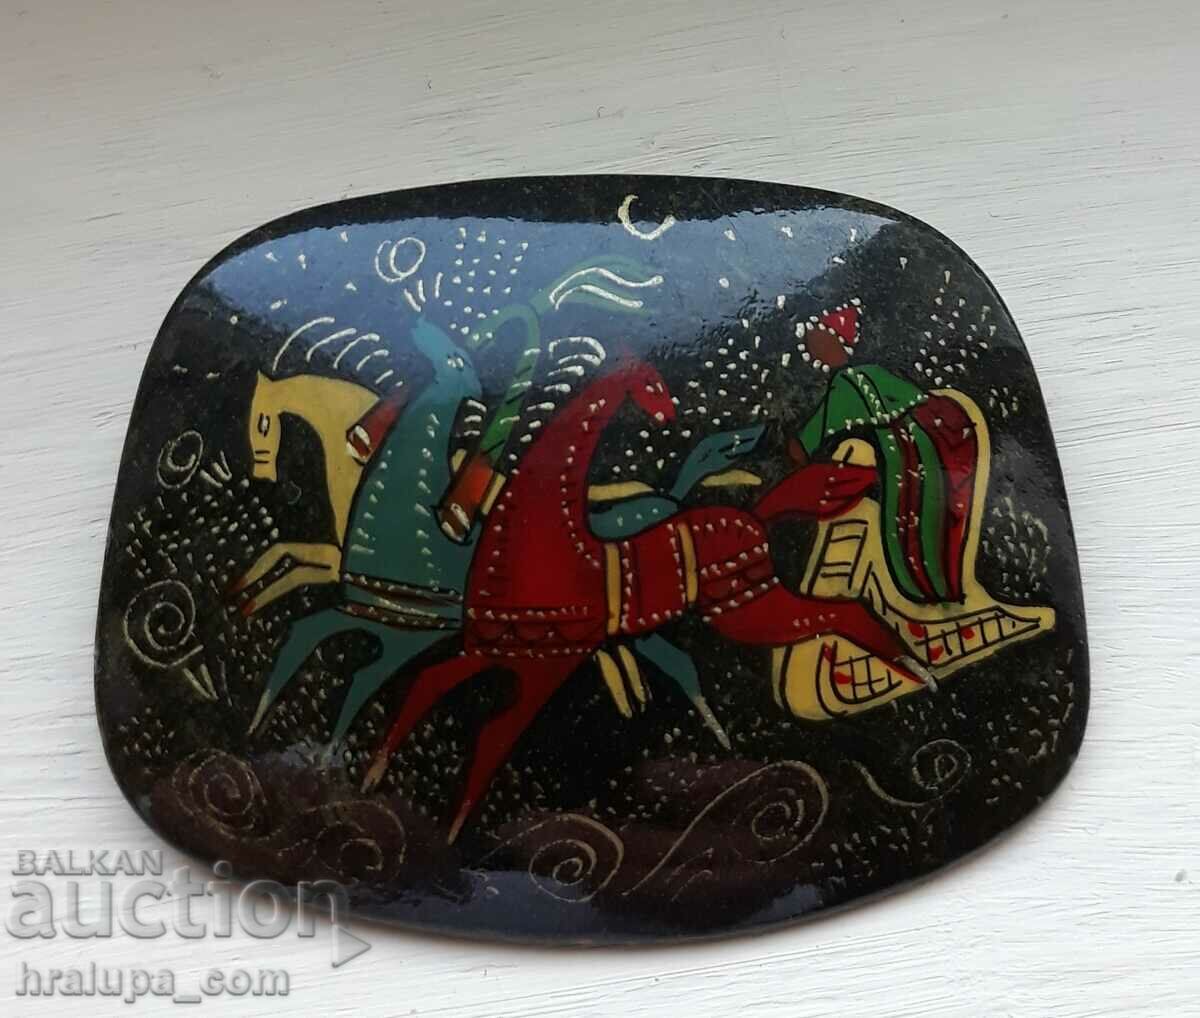 Russian Palekh brooch on stone lacquer finish